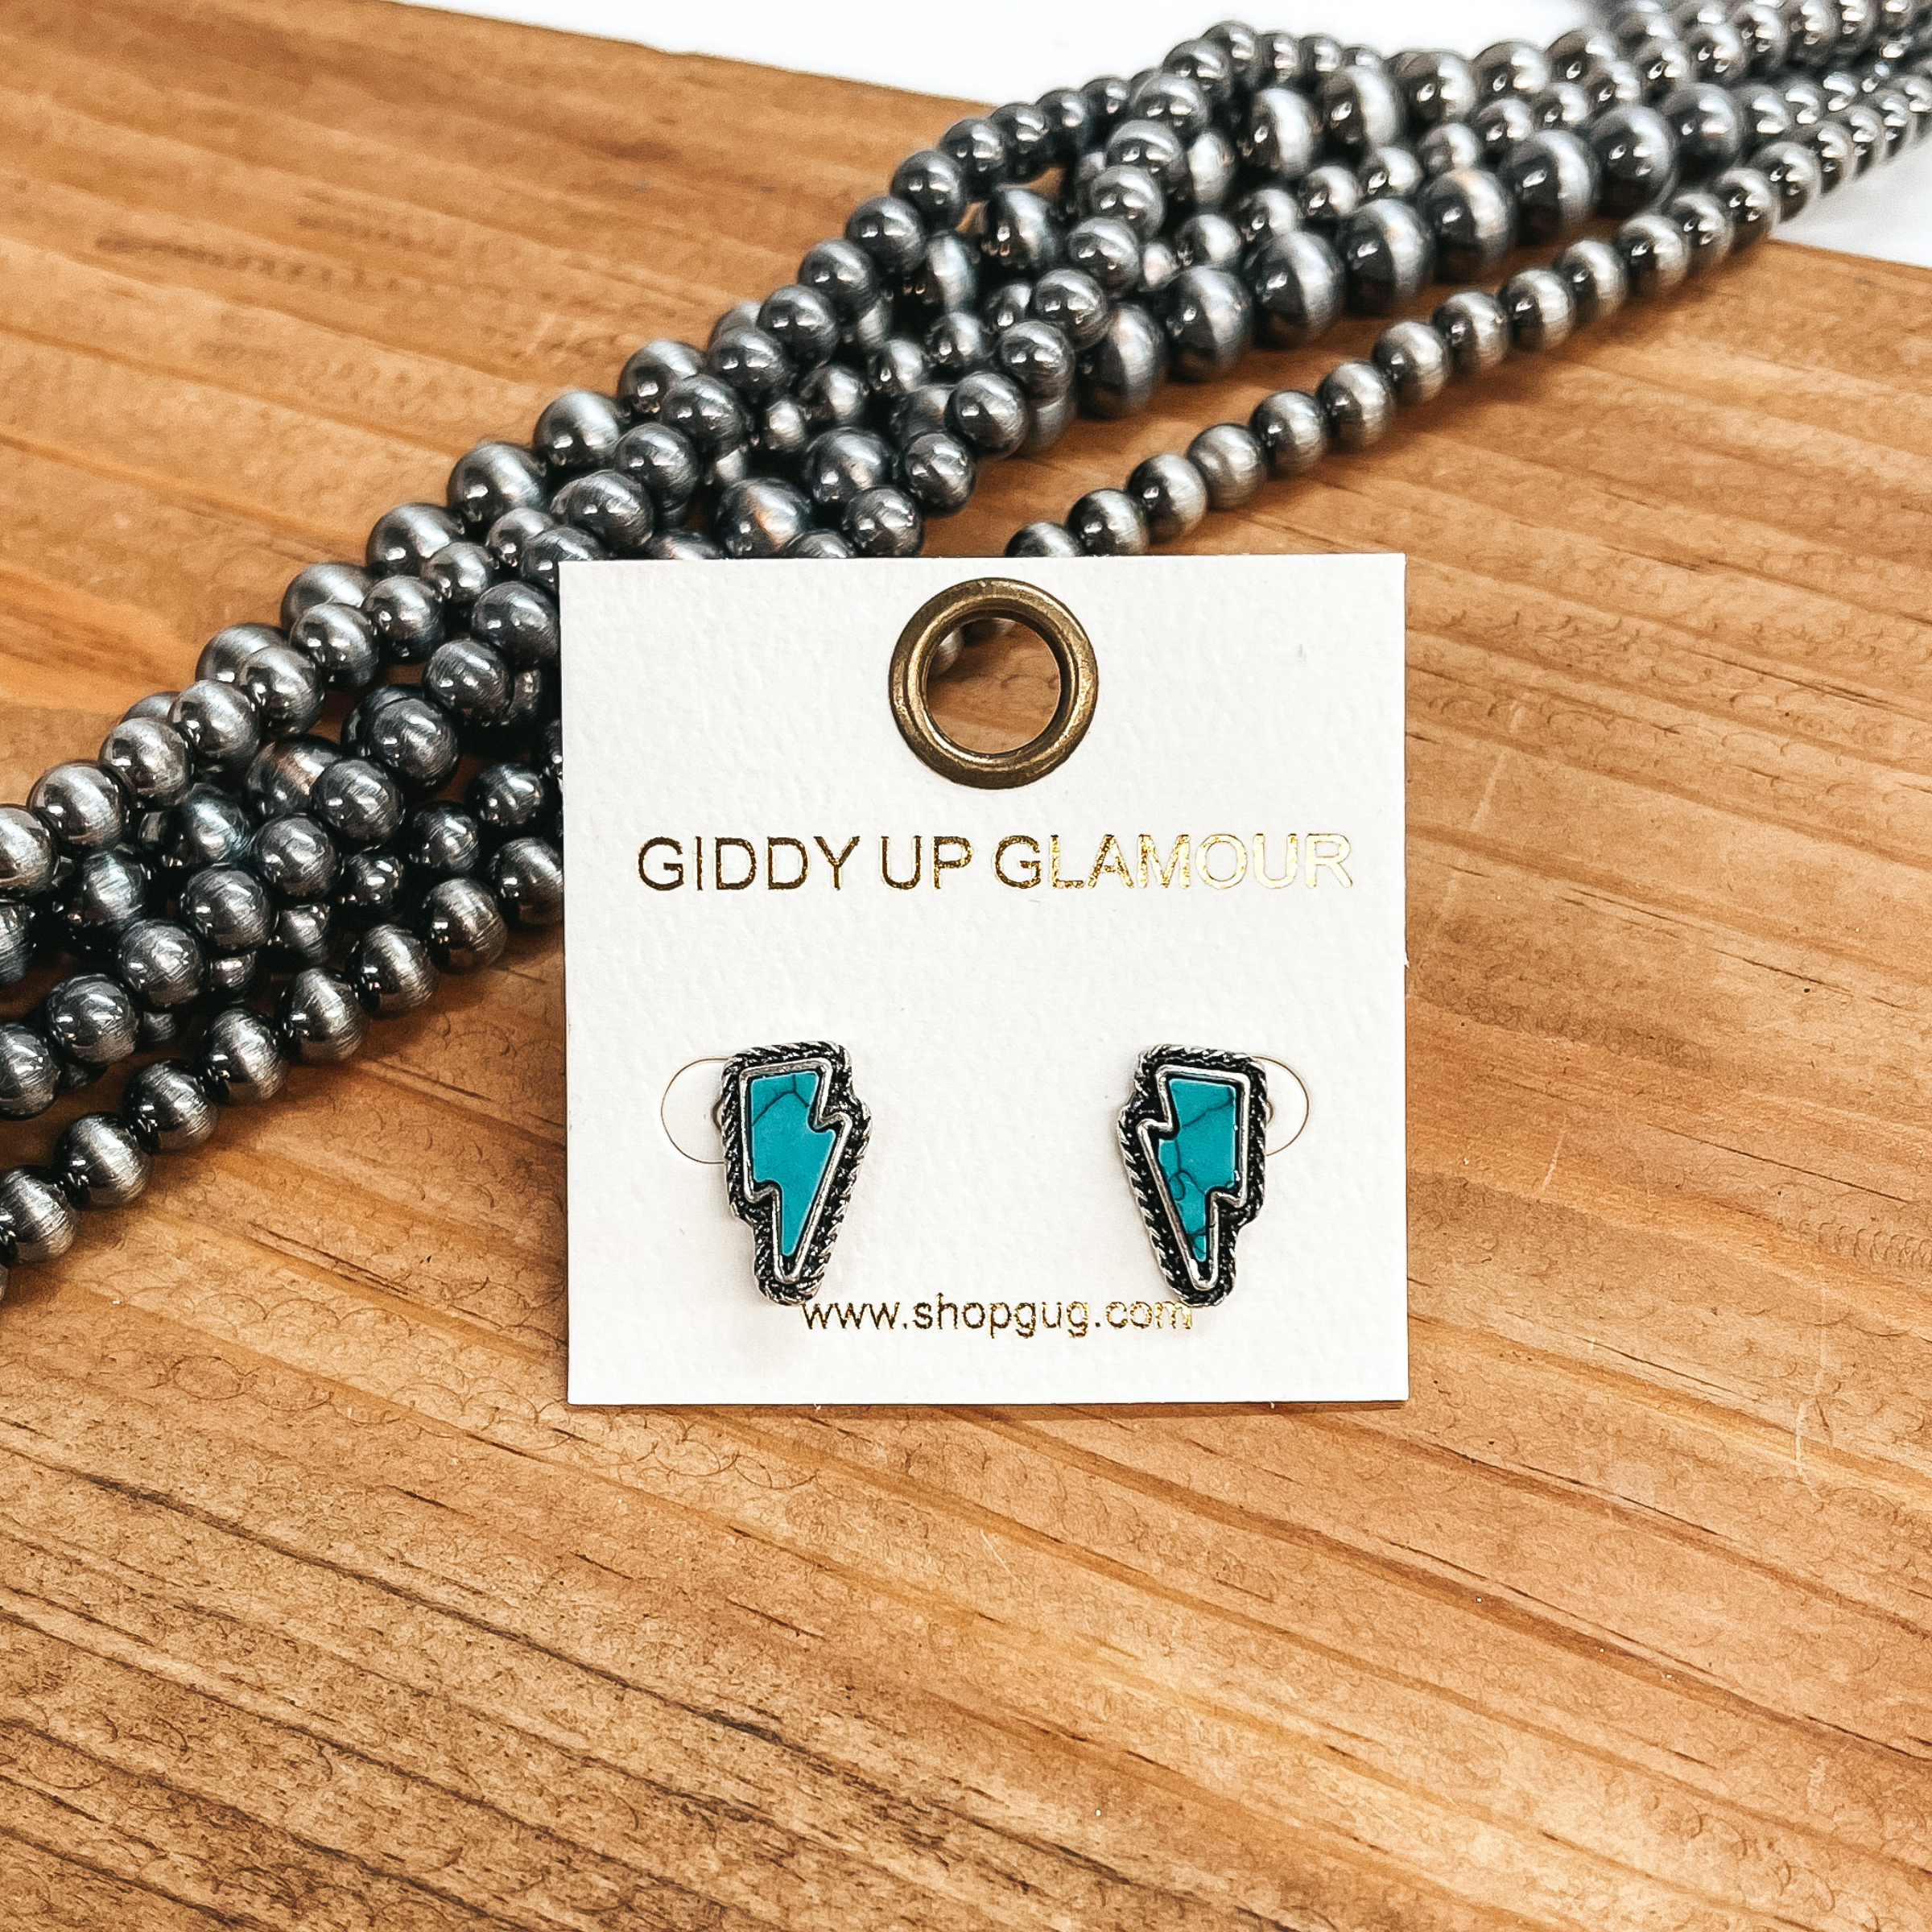 These are small lightning bolt faux turquoise  stone in a silver setting with detailing. These  earrings are taken on a brown block with Navajo  pearls in the side as decor.